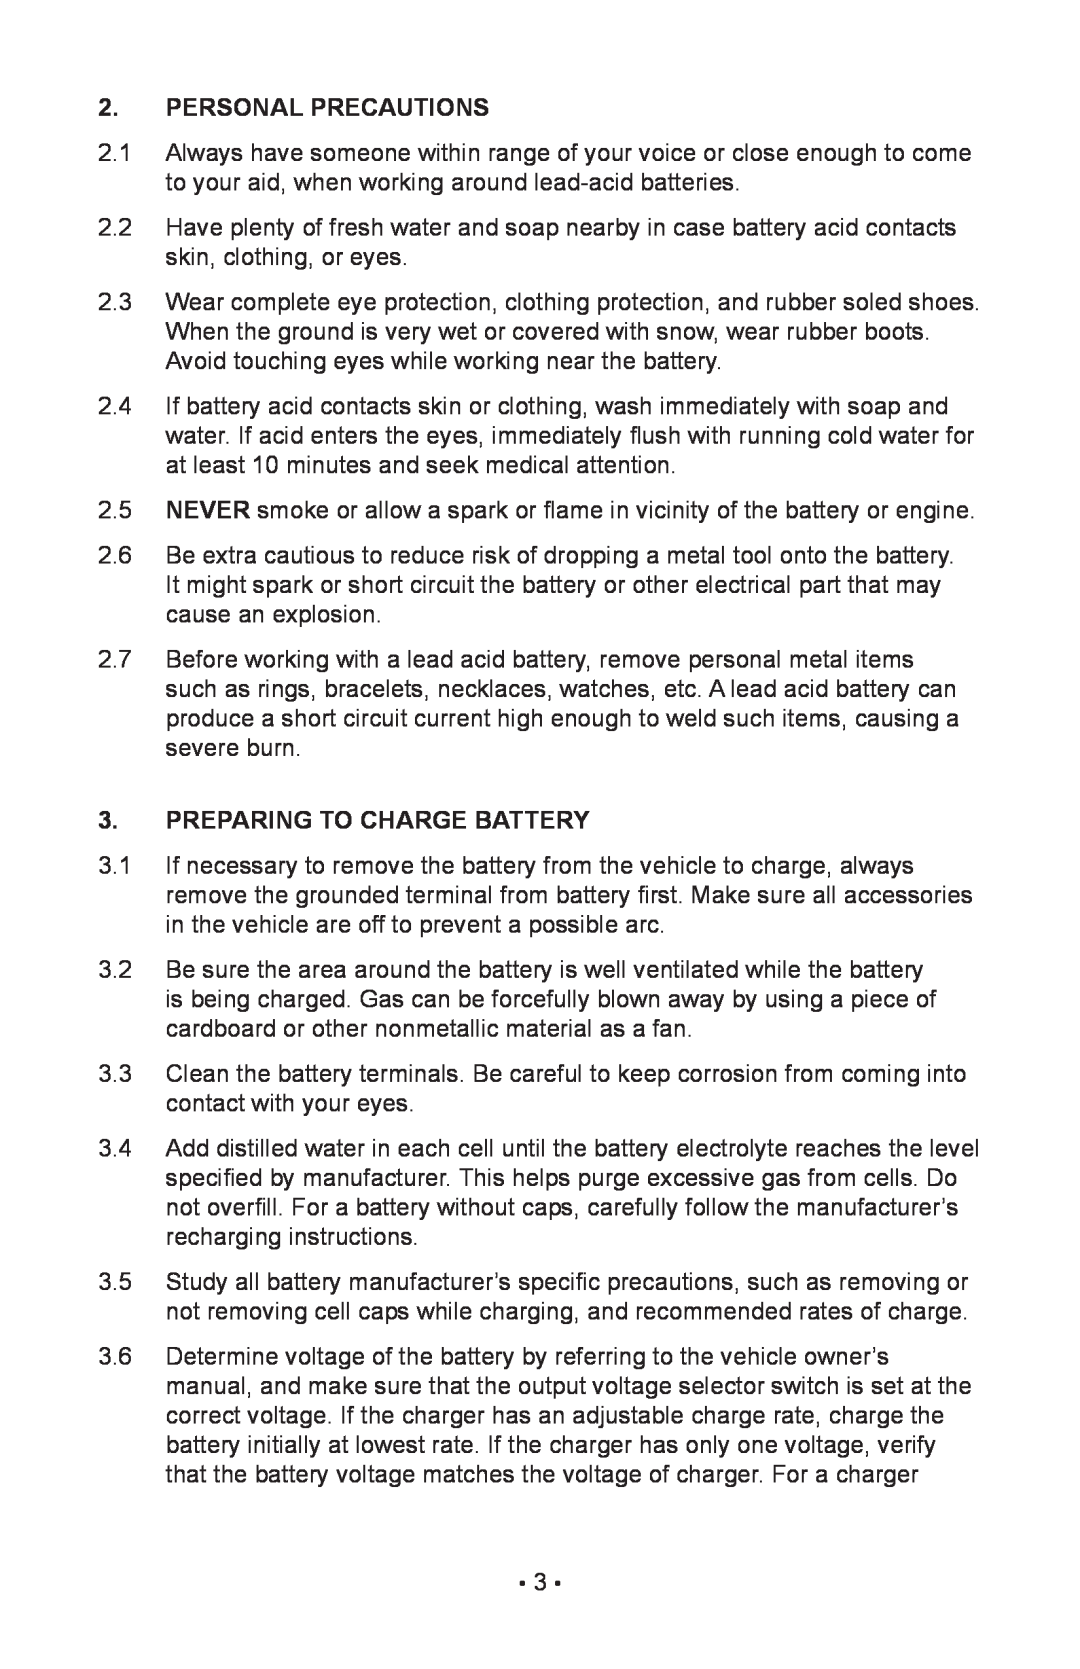 Schumacher 85-716 instruction manual Personal Precautions, Preparing To Charge Battery 